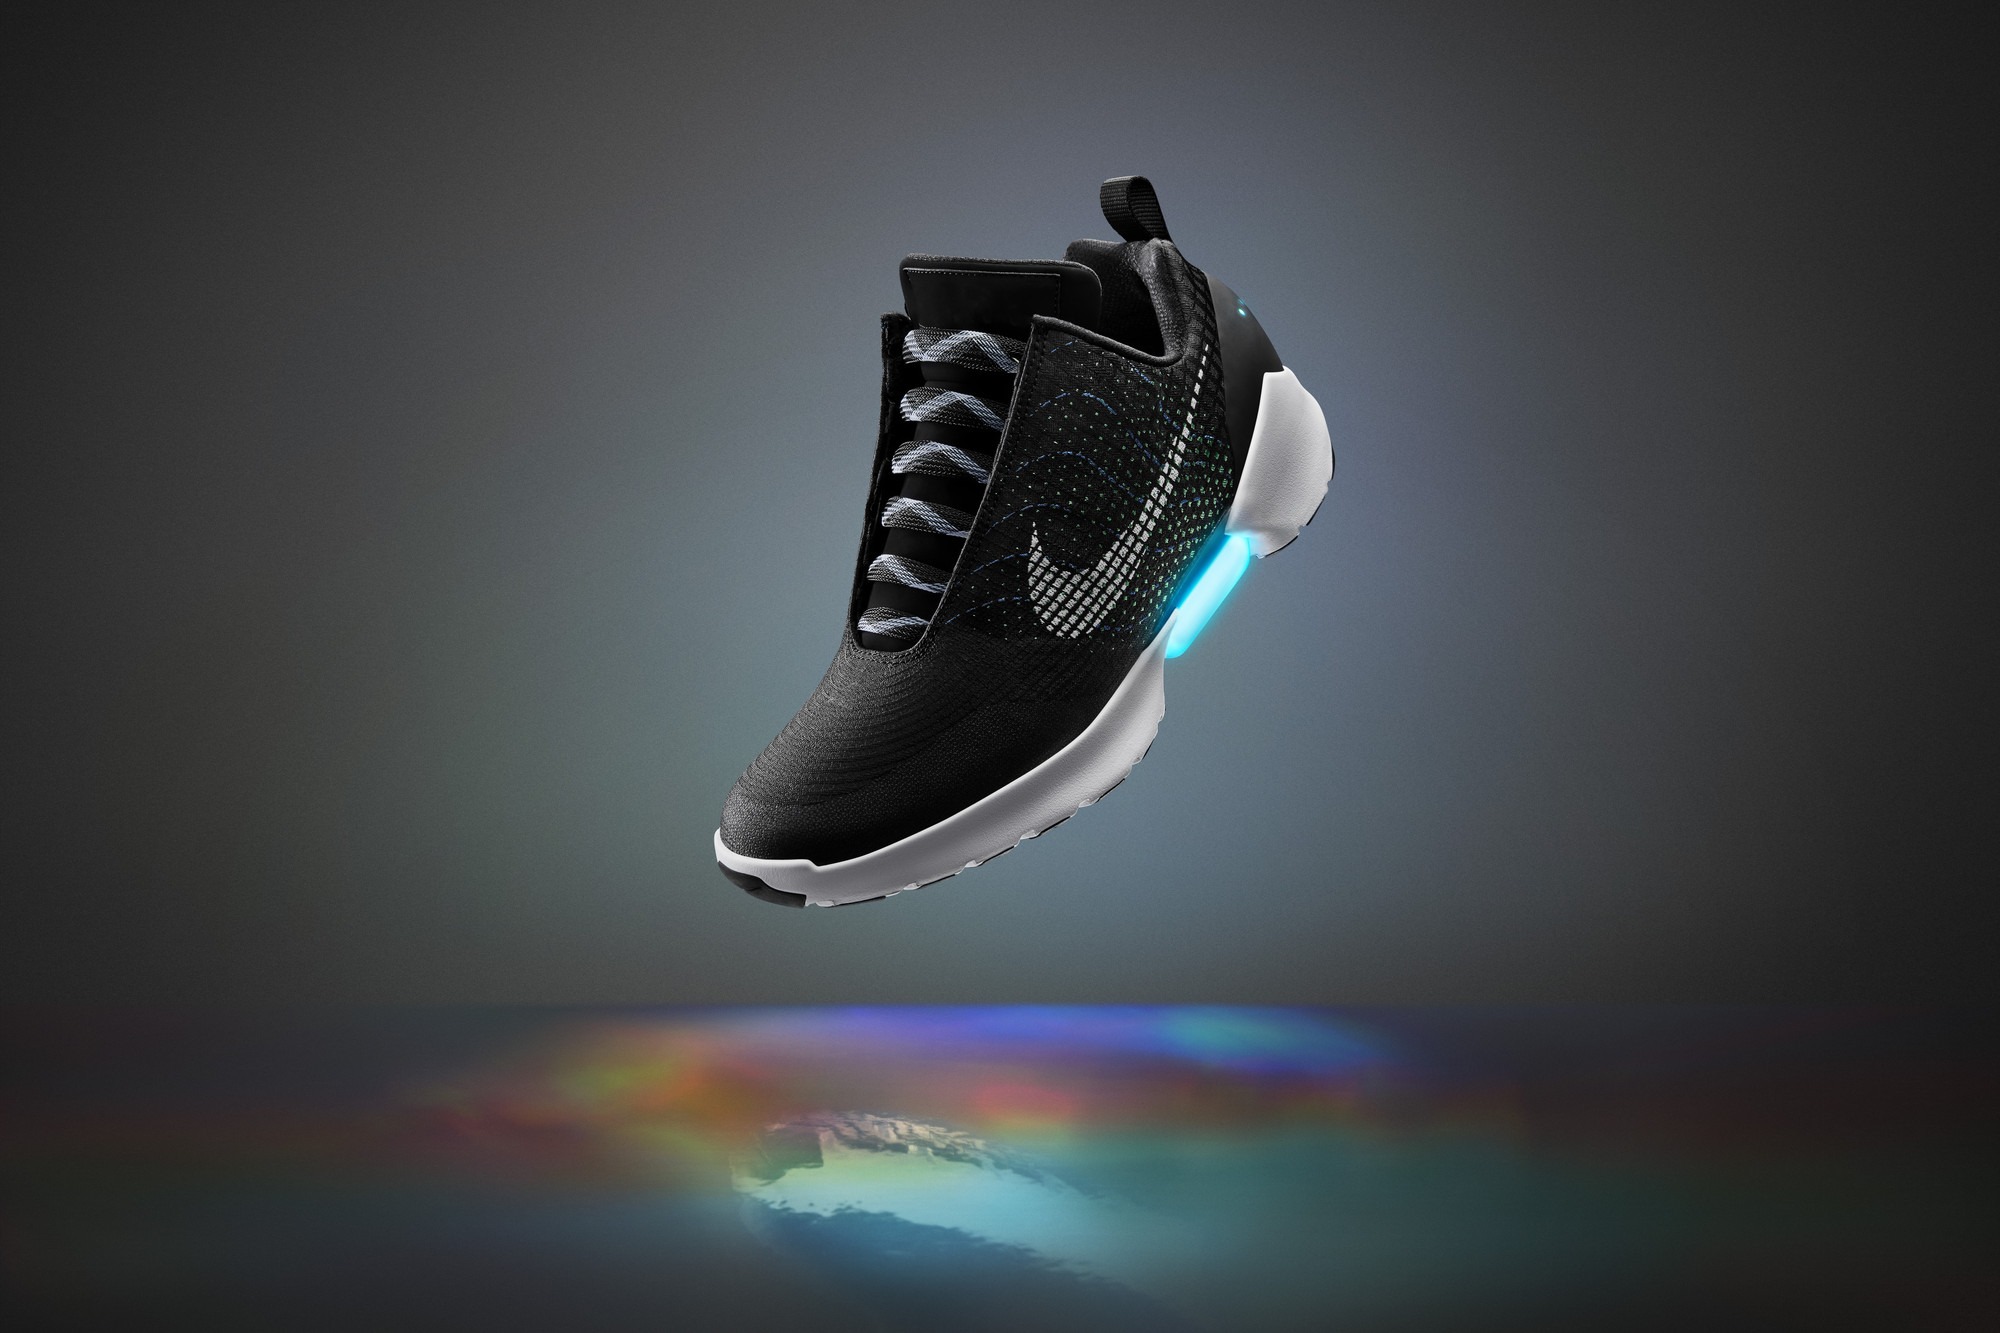 Frotar Mesa final Inmundo Nike HyperAdapt 1.0 Shoes Feature Mechanized, Auto-lacing Technology -  SolidSmack